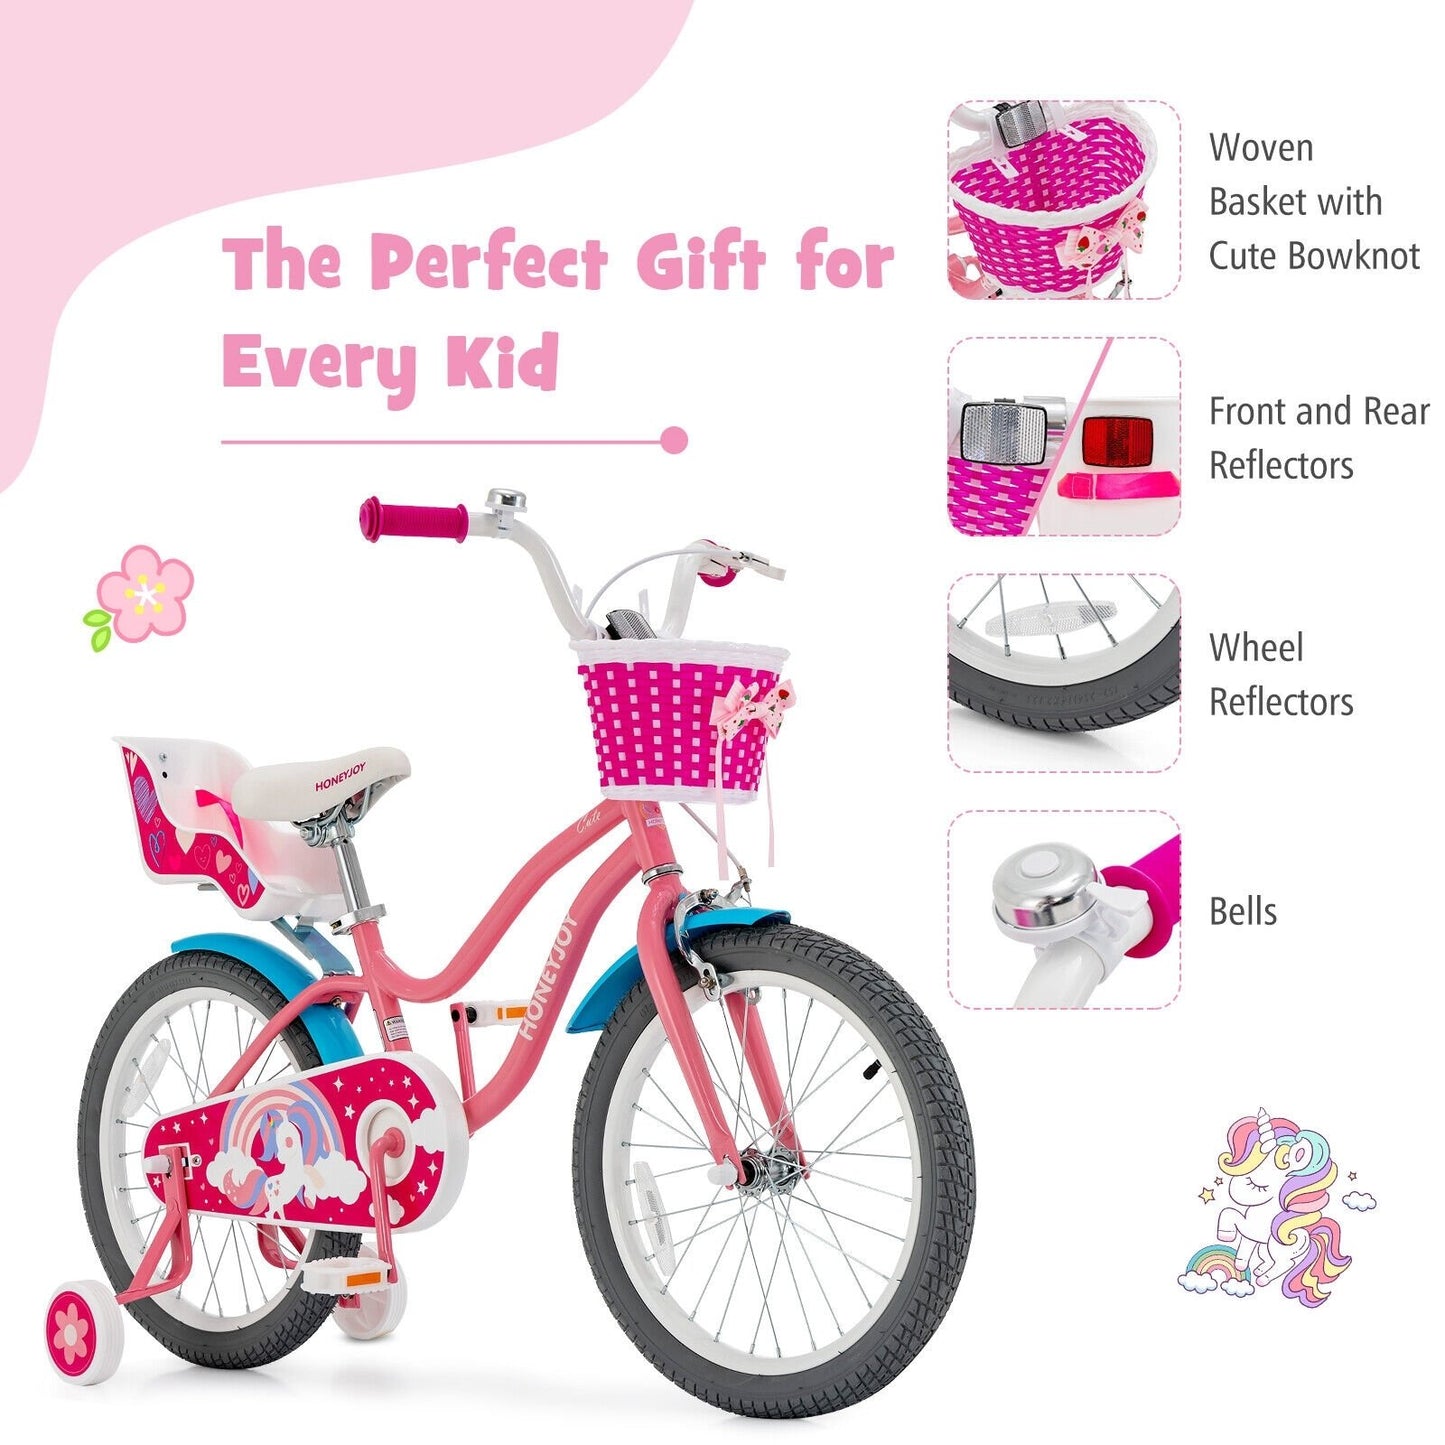 Kids Bicycle with Training Wheels and Basket for Boys and Girls Age 3-9 Years-18", Pink